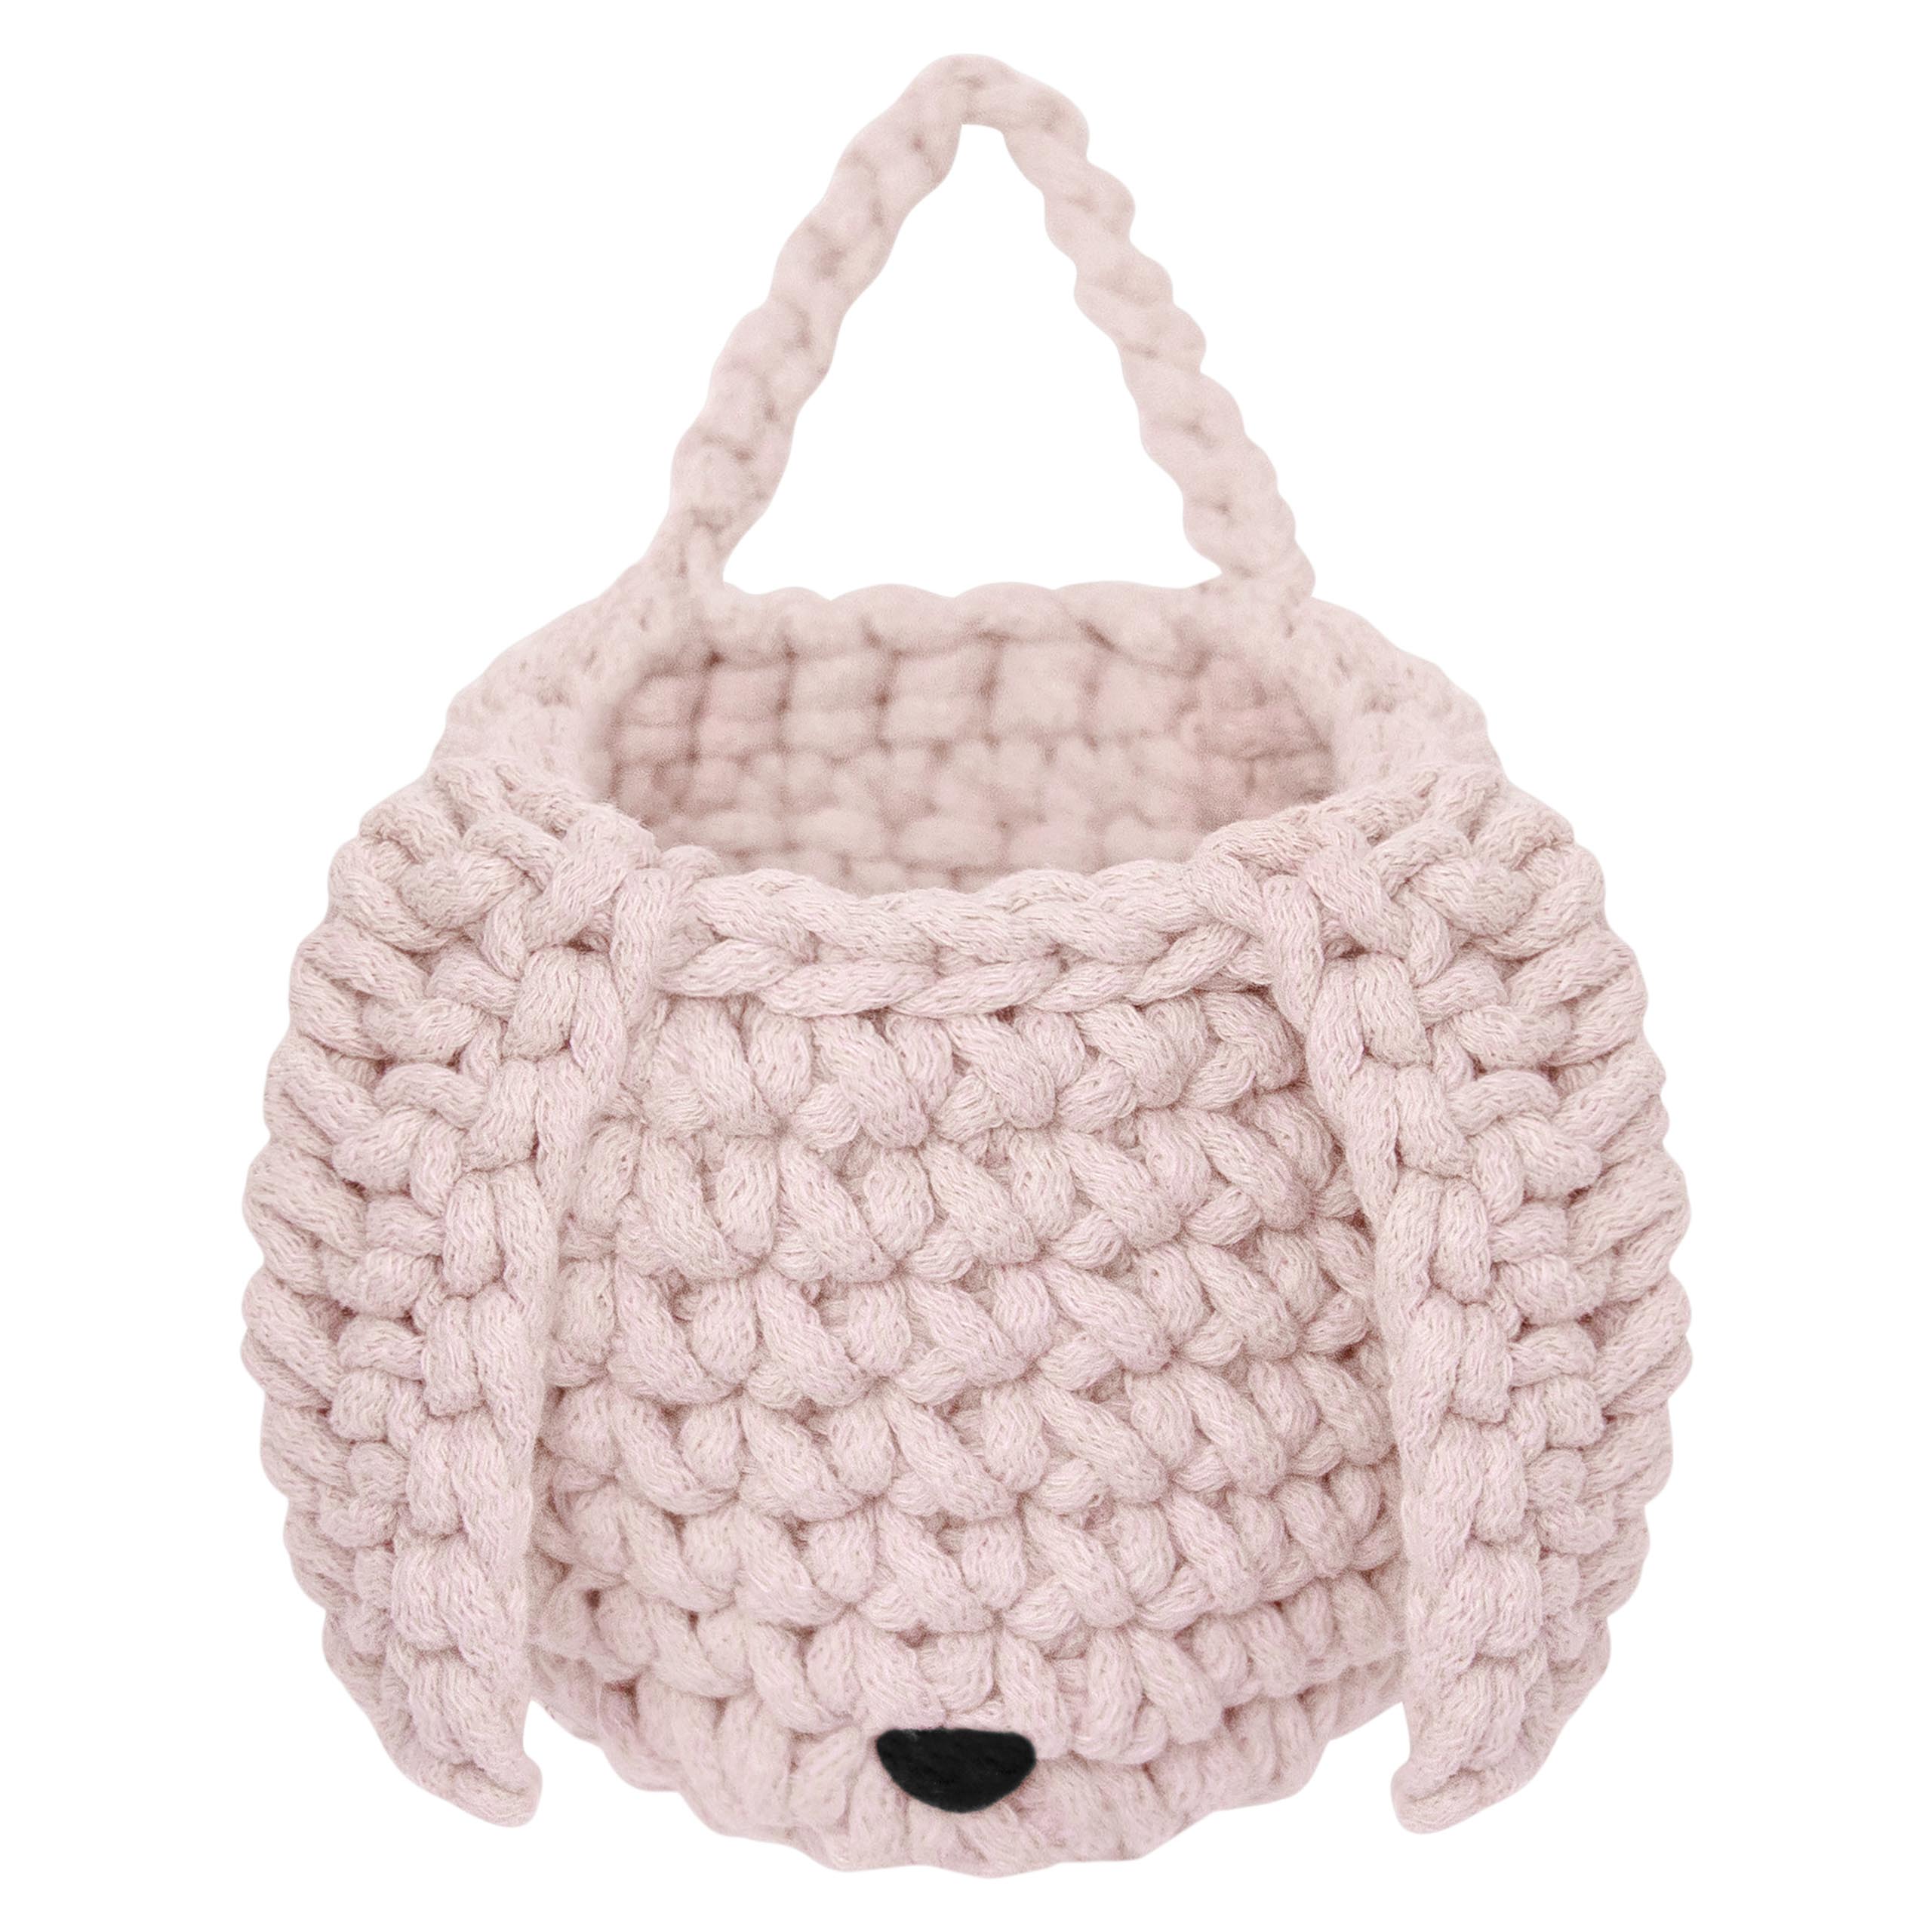 Zuri House Crochet Bunny Basket | PALE PINK - with handle